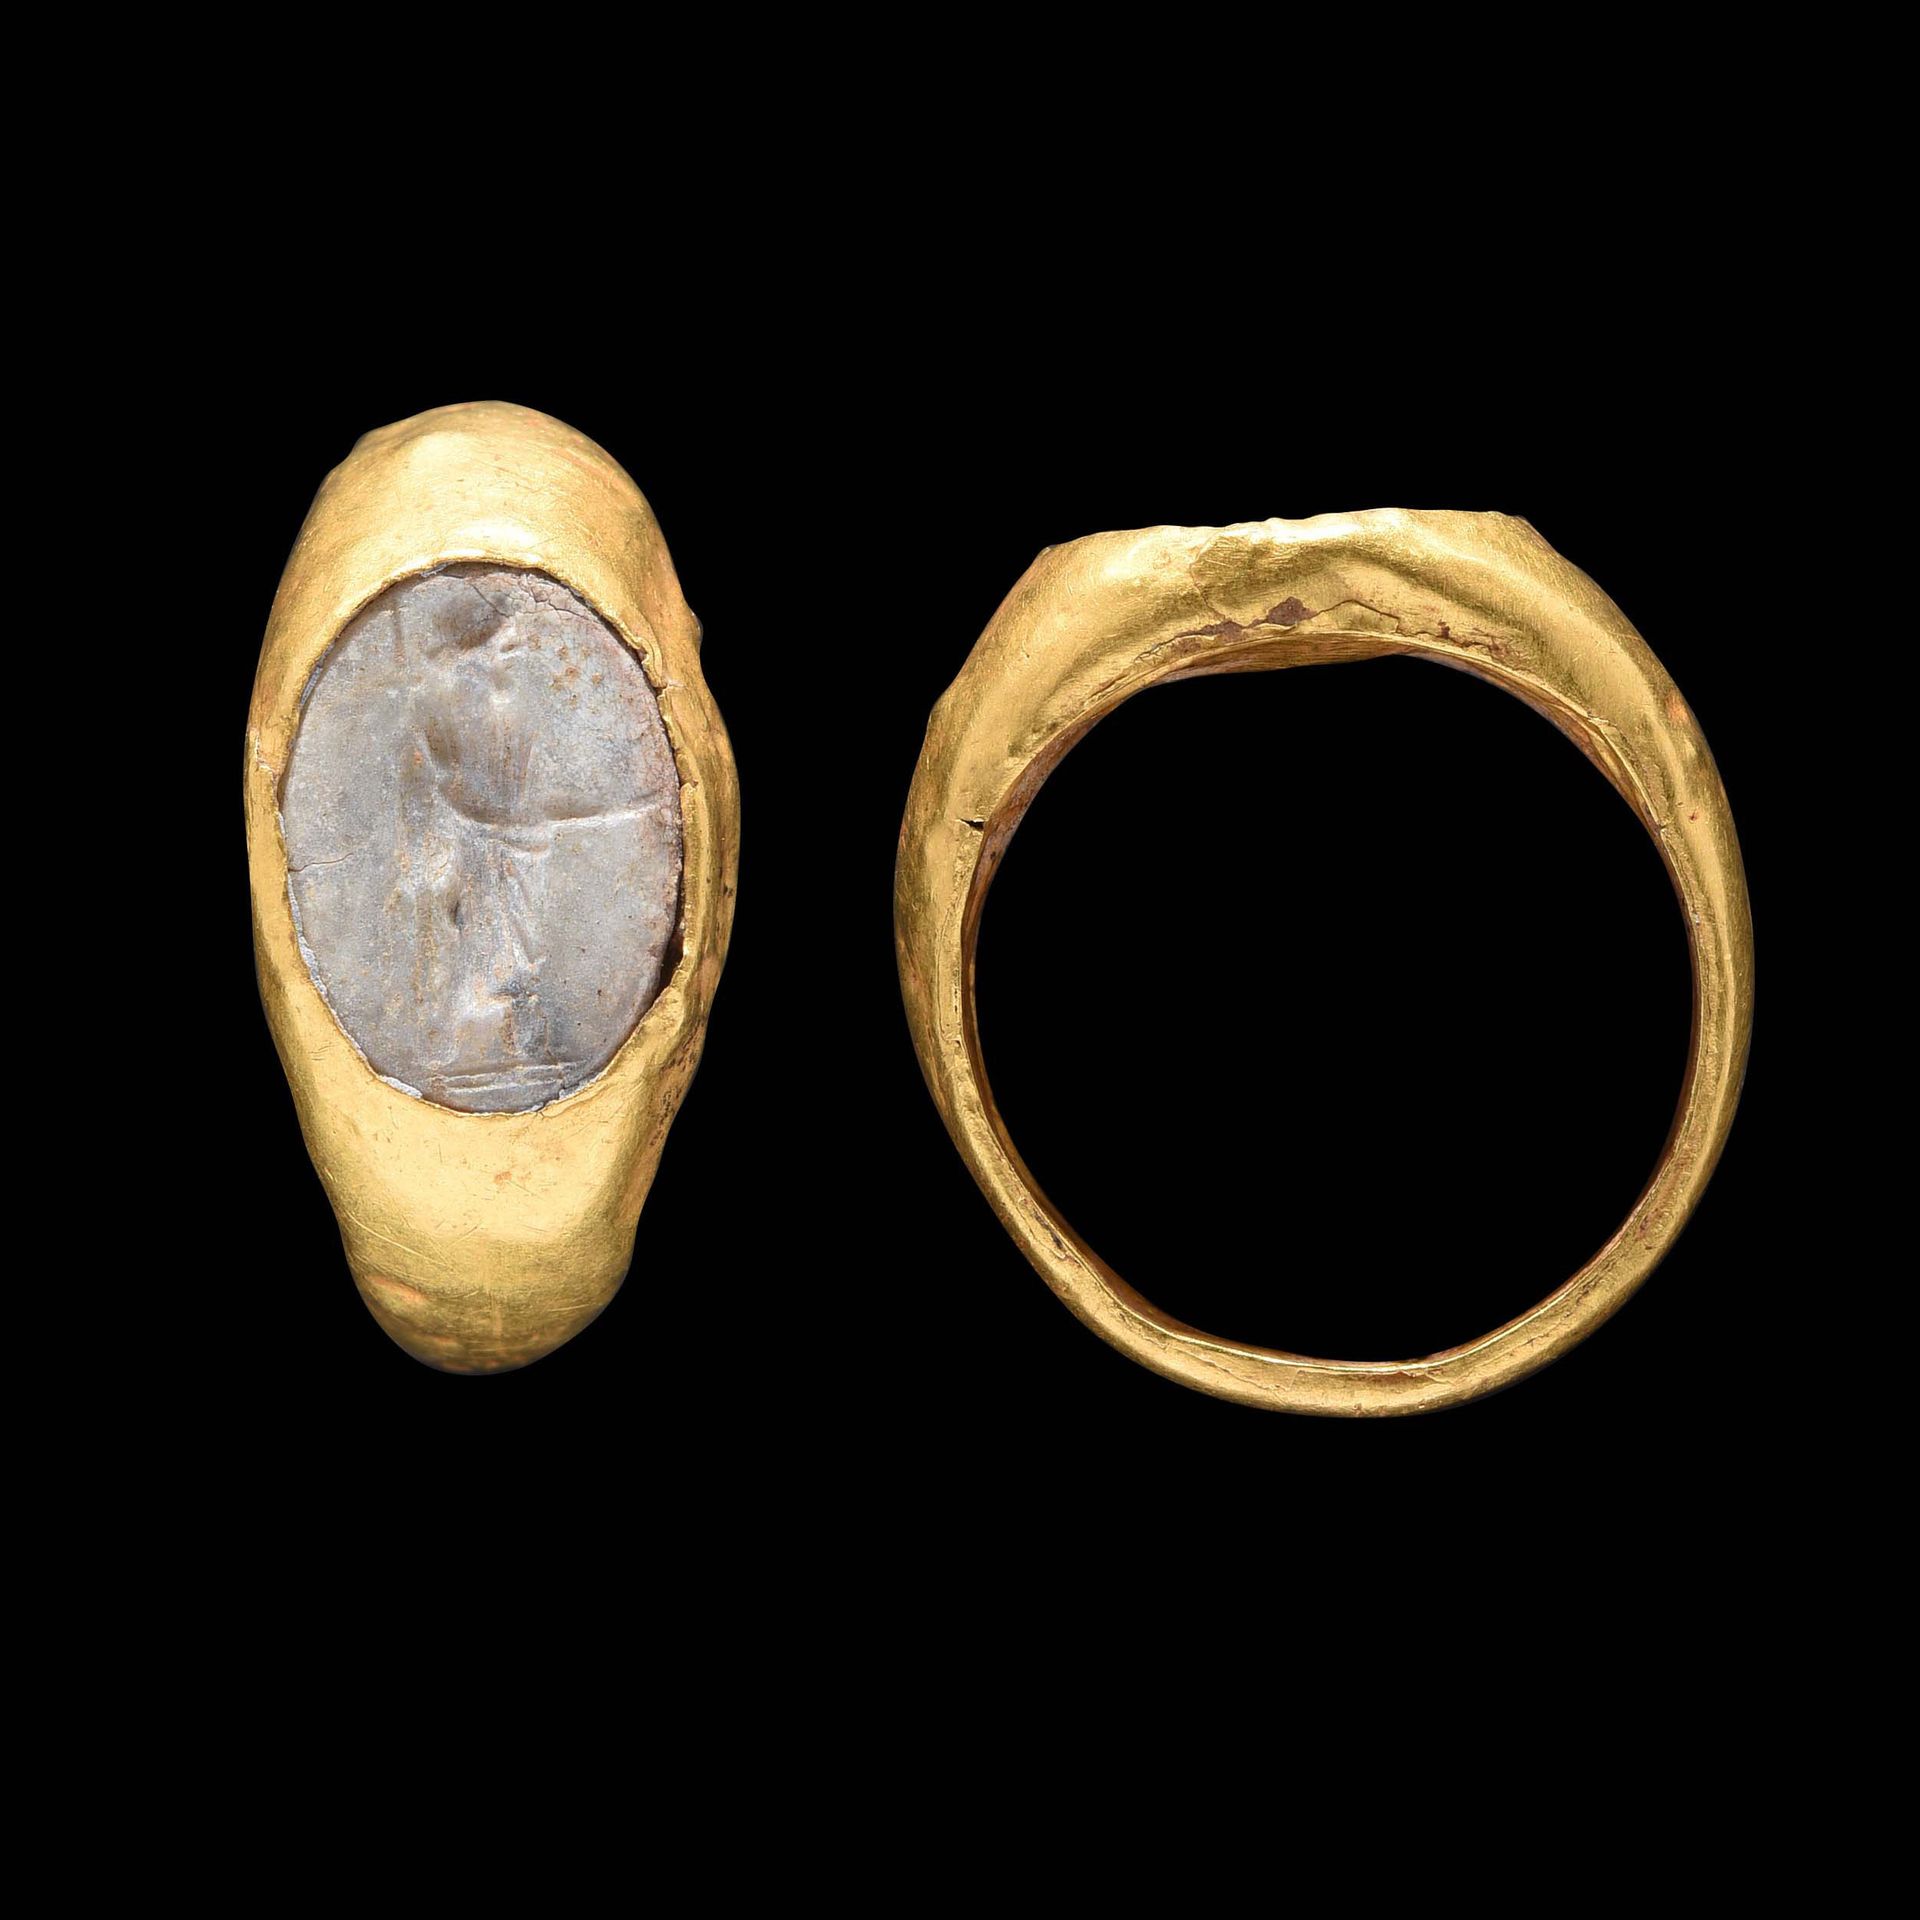 Null RING

Roman art, 1st-2nd century.

Hammered gold leaf, set with an intaglio&hellip;